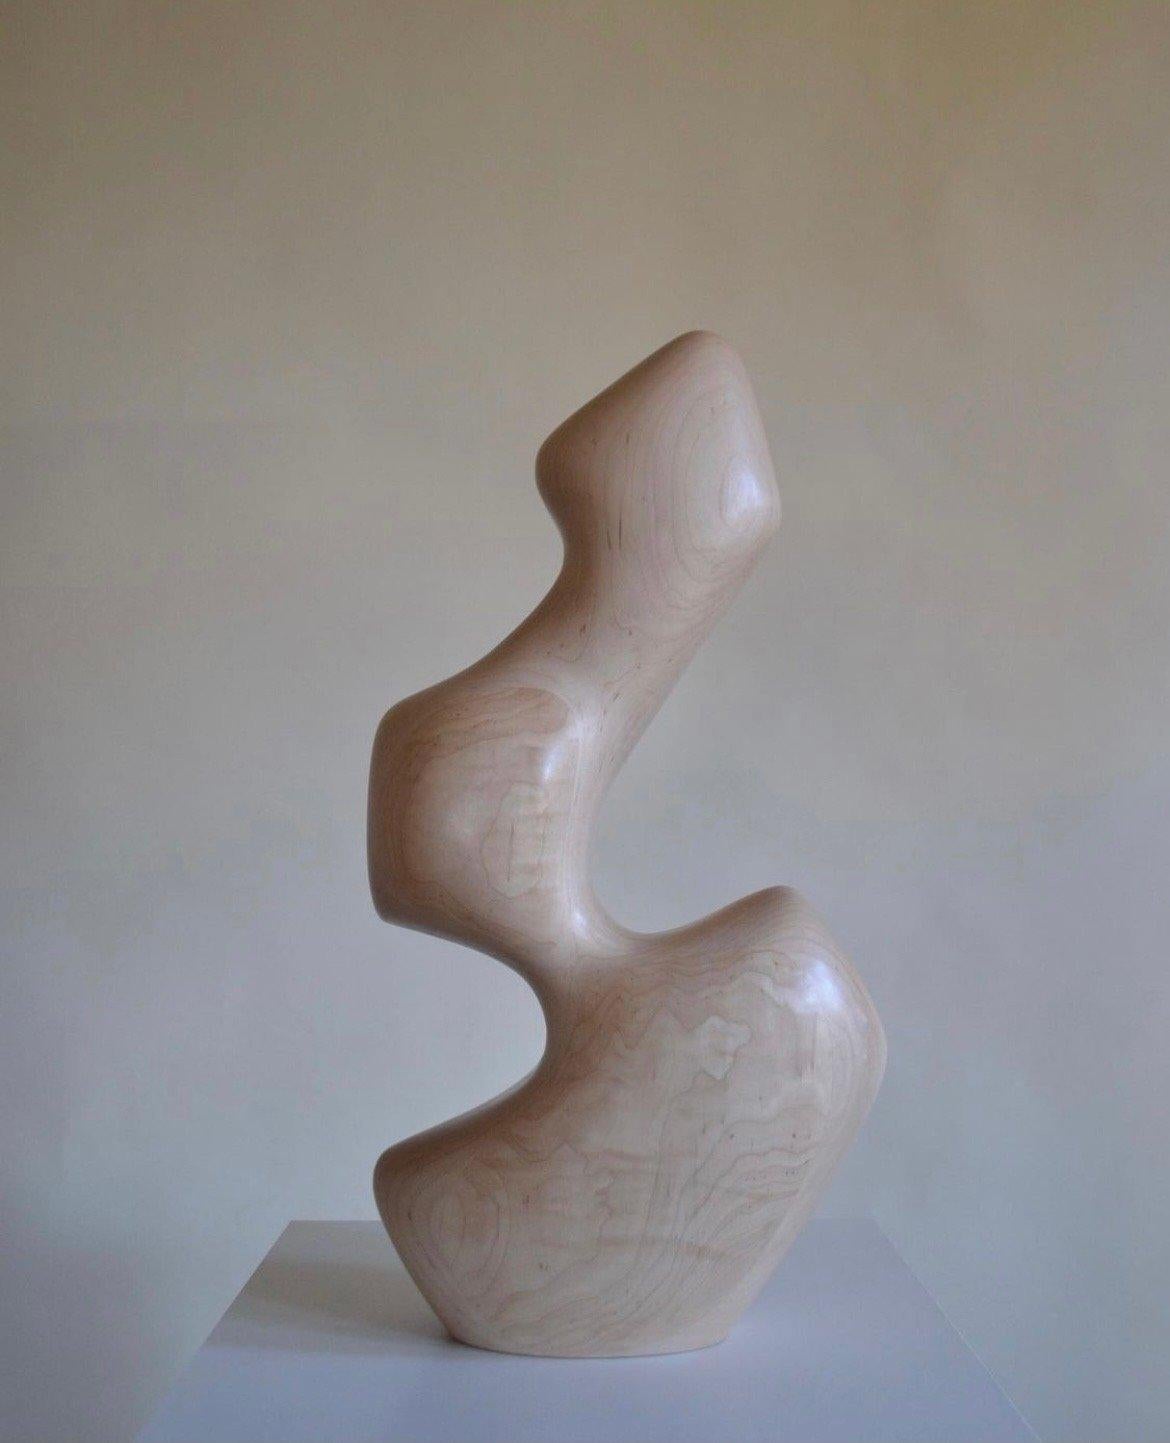 Topography Gen I Sculpture by Chandler McLellan
Limited Edition Of 10 Pieces.
Dimensions: D 12.7 x W 25.4 x H 40,1 cm. 
Materials: Hard maple.

Sculptures will be signed and numbered on the bottom of the base. Please contact us.

Chandler McLellan
I